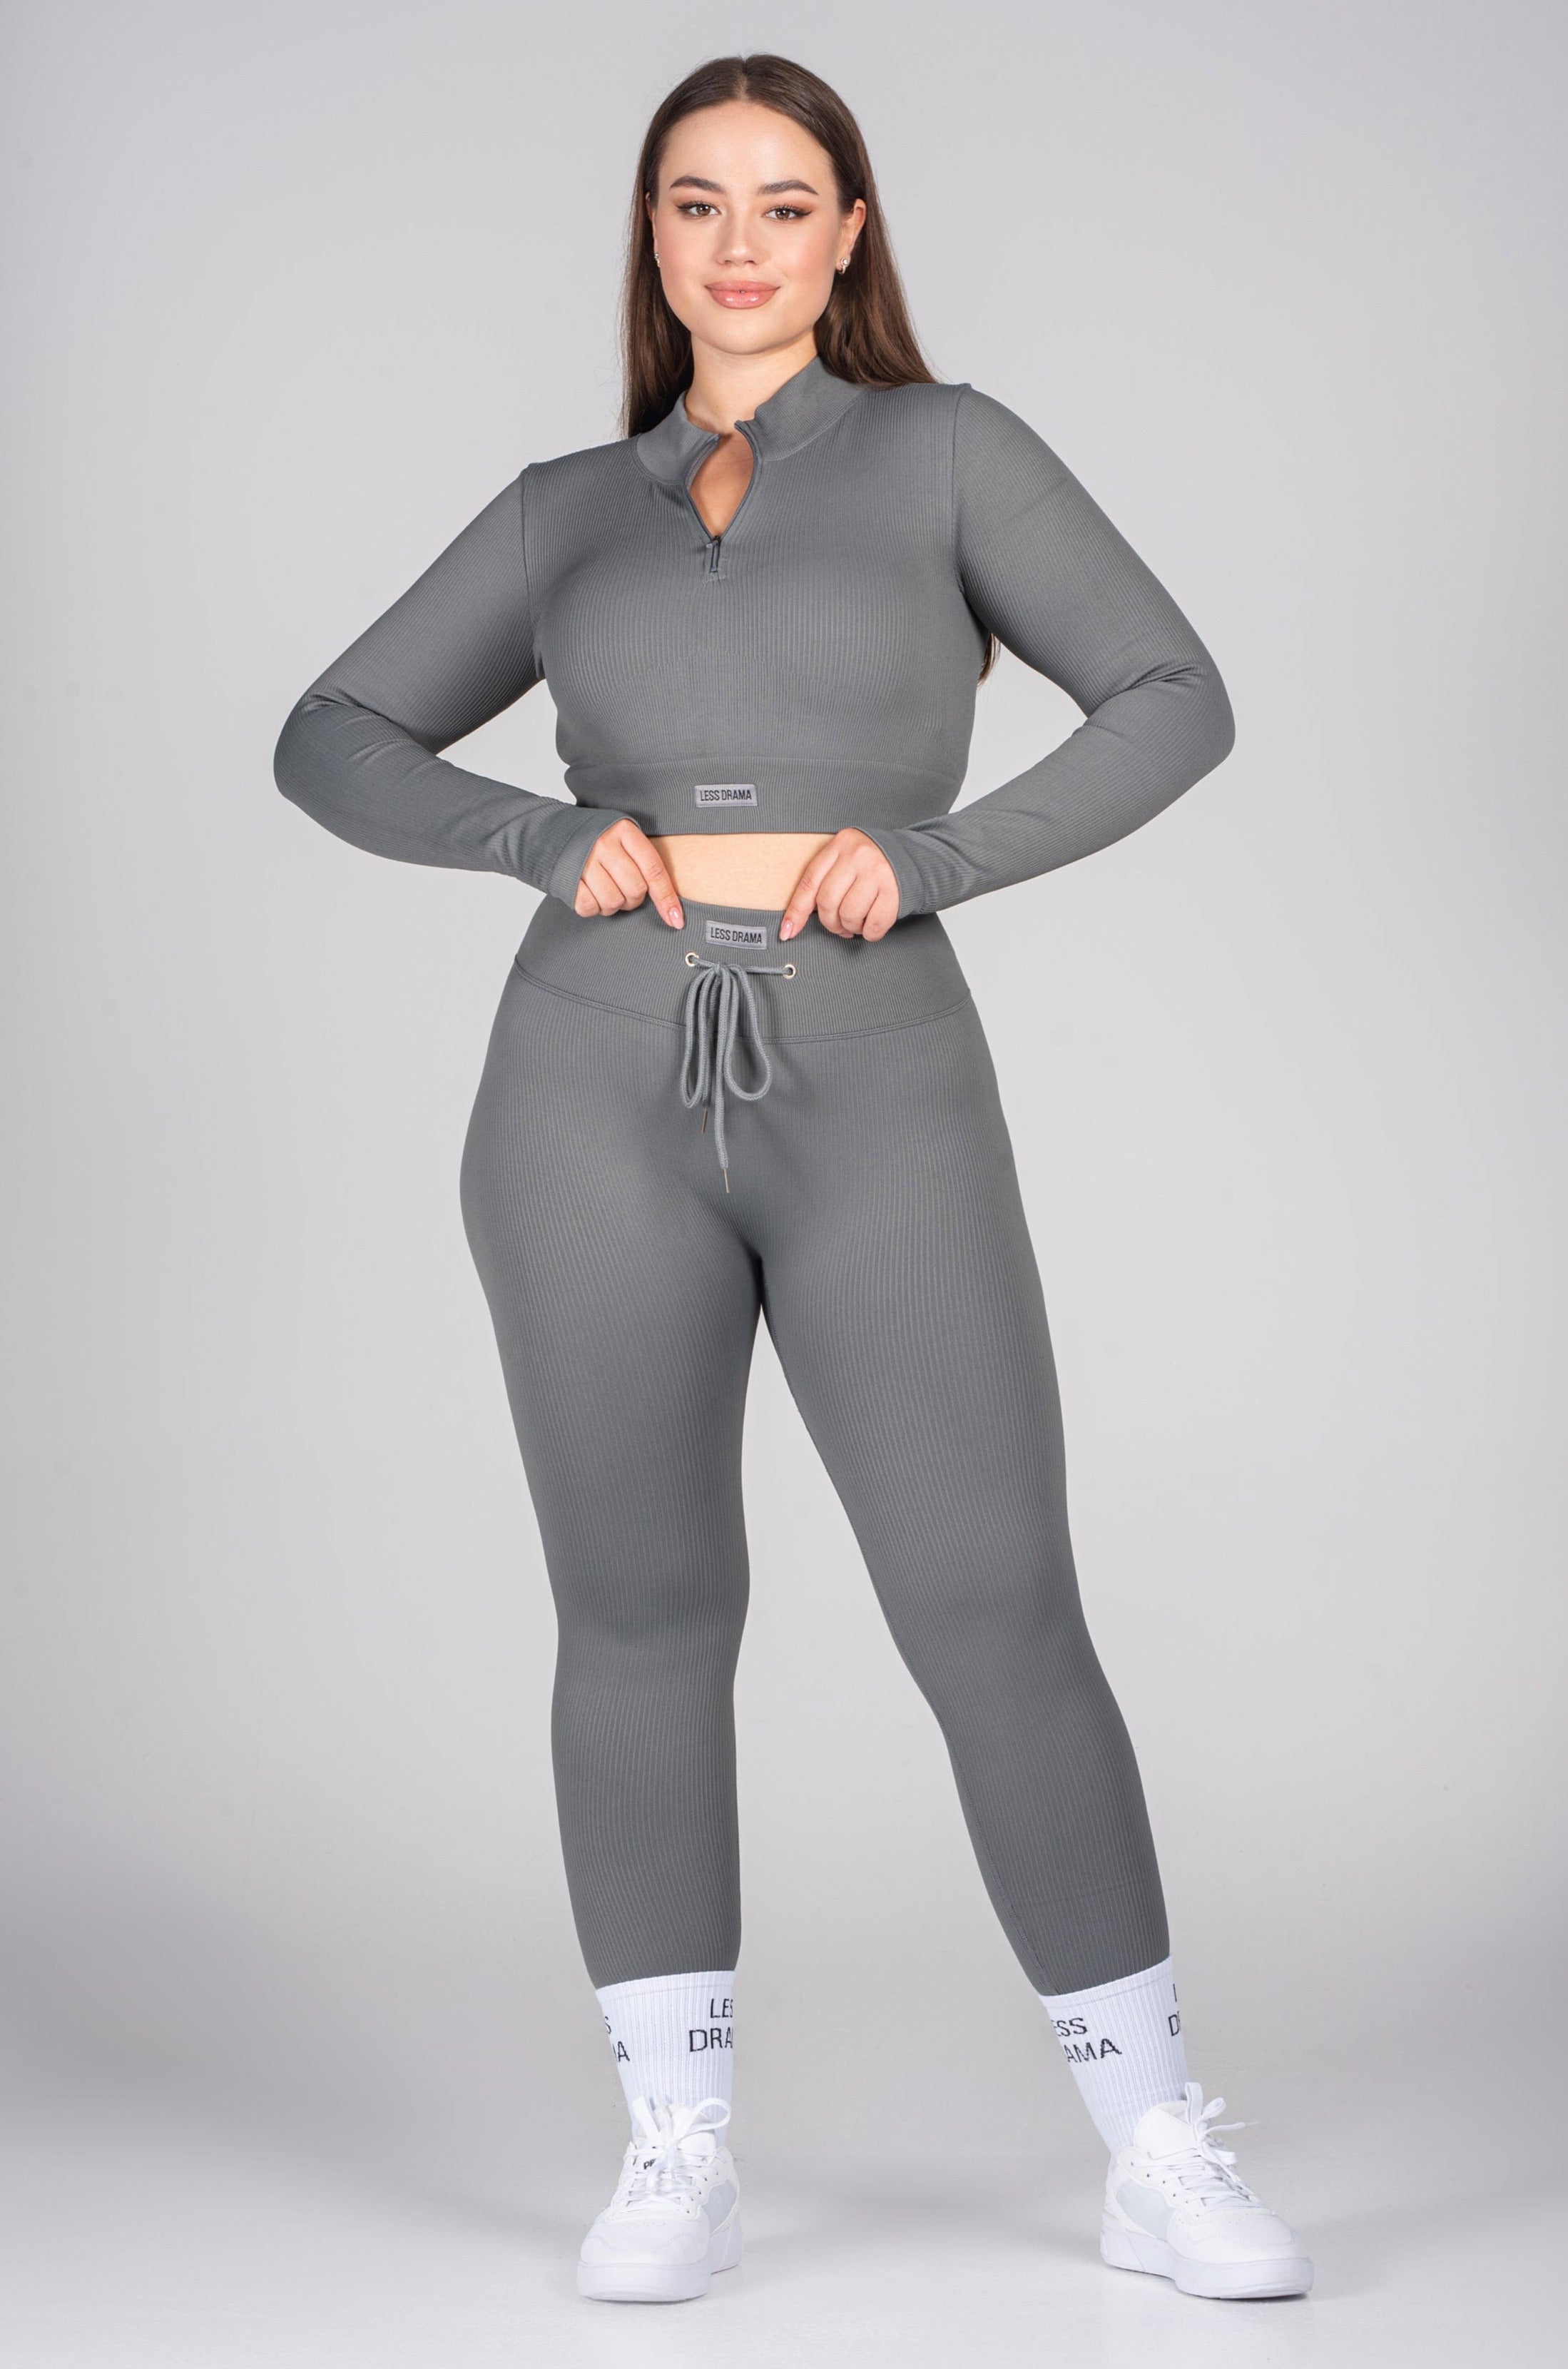 Ribbed Tight Leggings in Grey - Usolo Outfitters